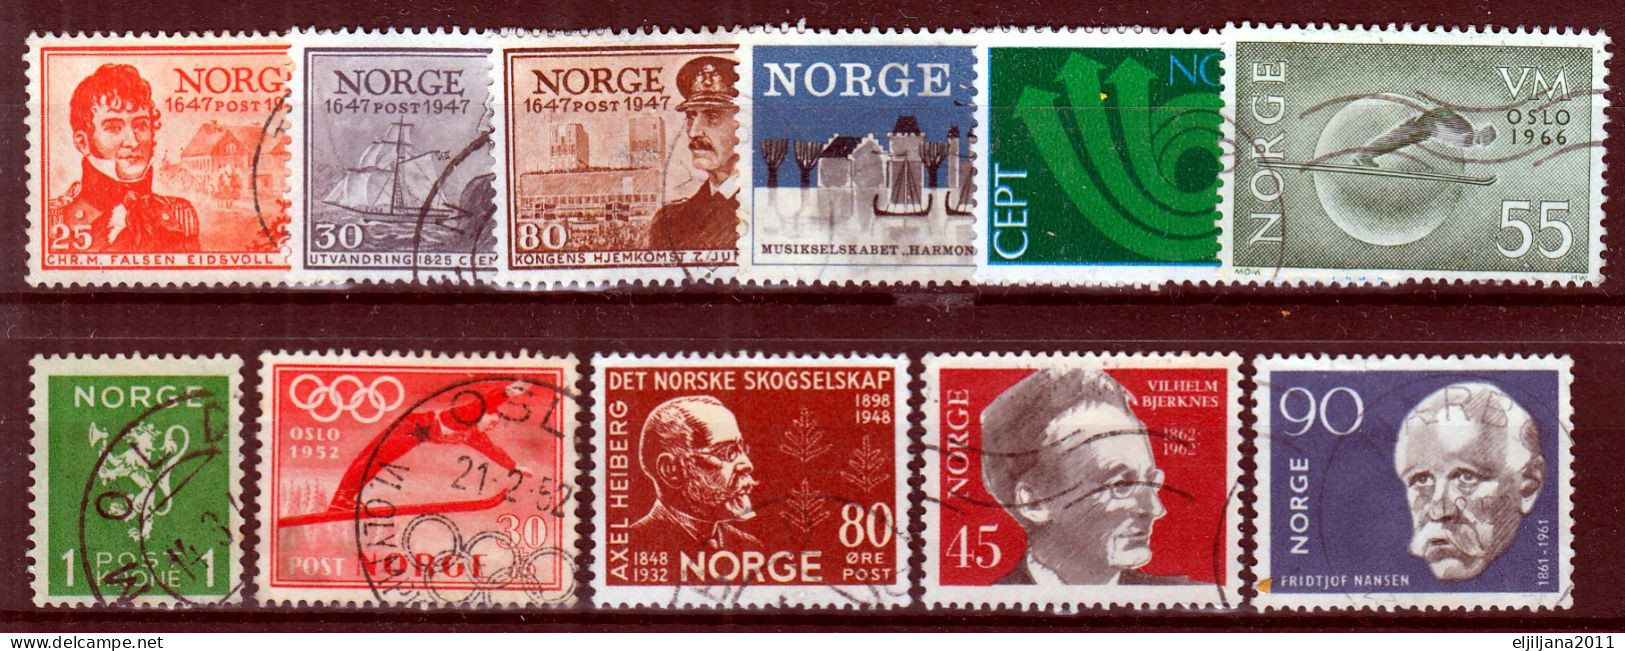 Action !! SALE !! 50 % OFF !! ⁕ Norway / NORGE 1938 - 1966 ⁕ Nice Collection / Lot ⁕ 32v Used - See Scan - Collections